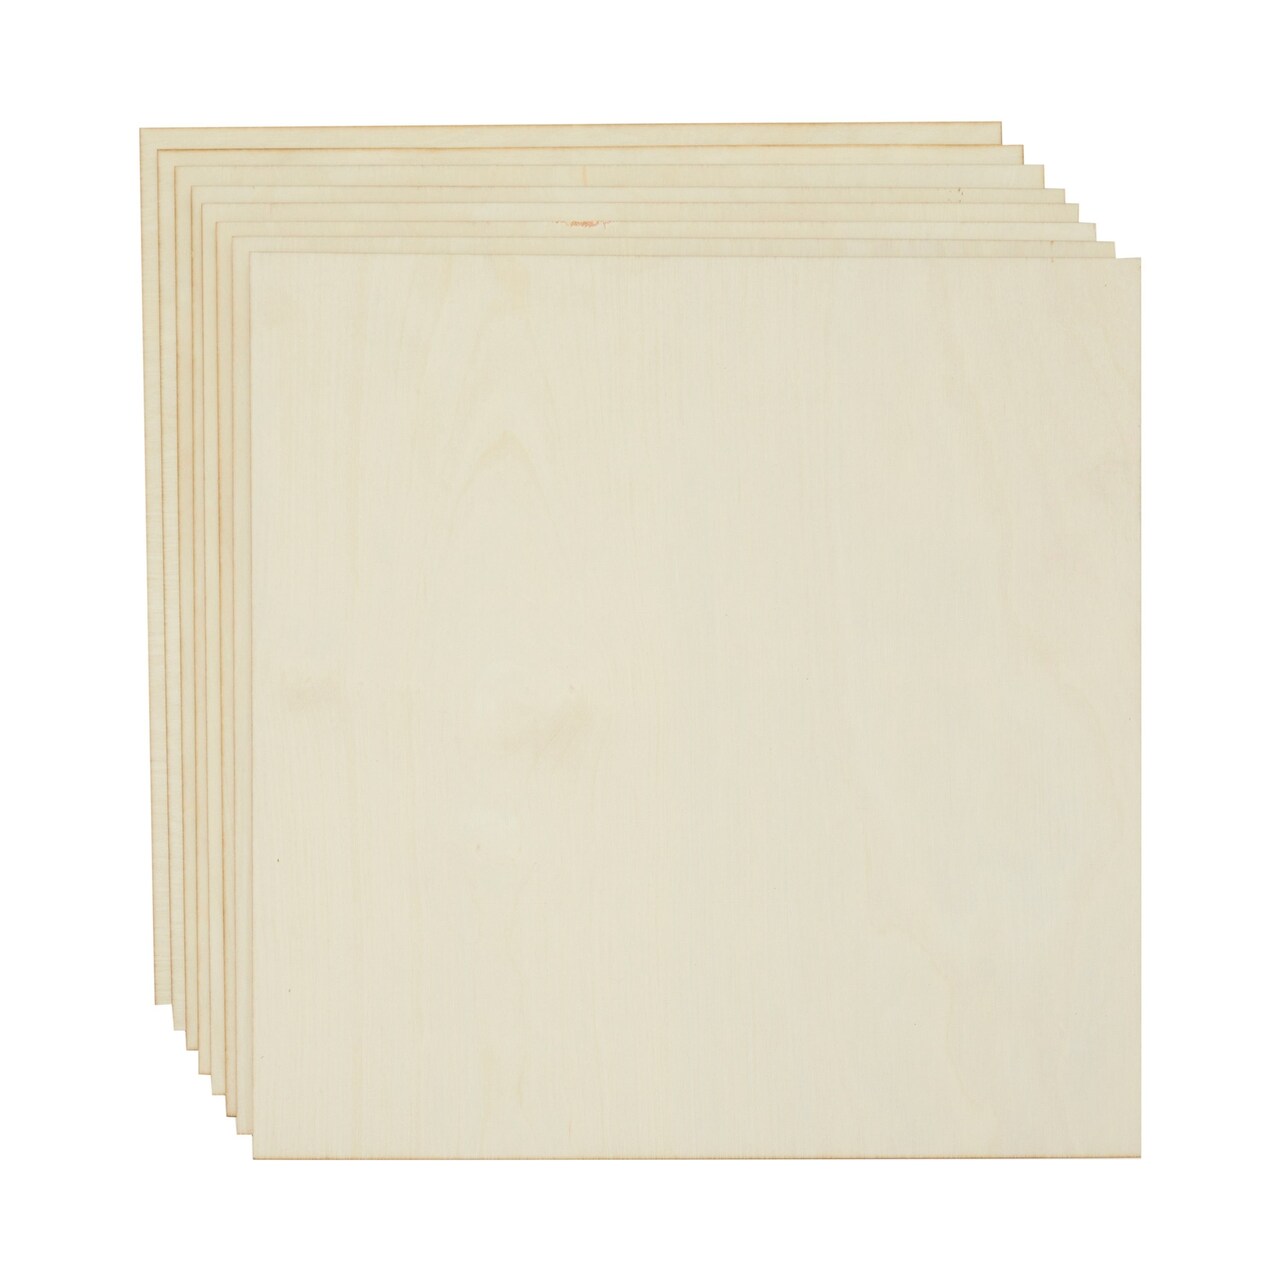 12x12 Wood Panels, Unfinished 3mm Birch Plywood Sheets (8 Pack